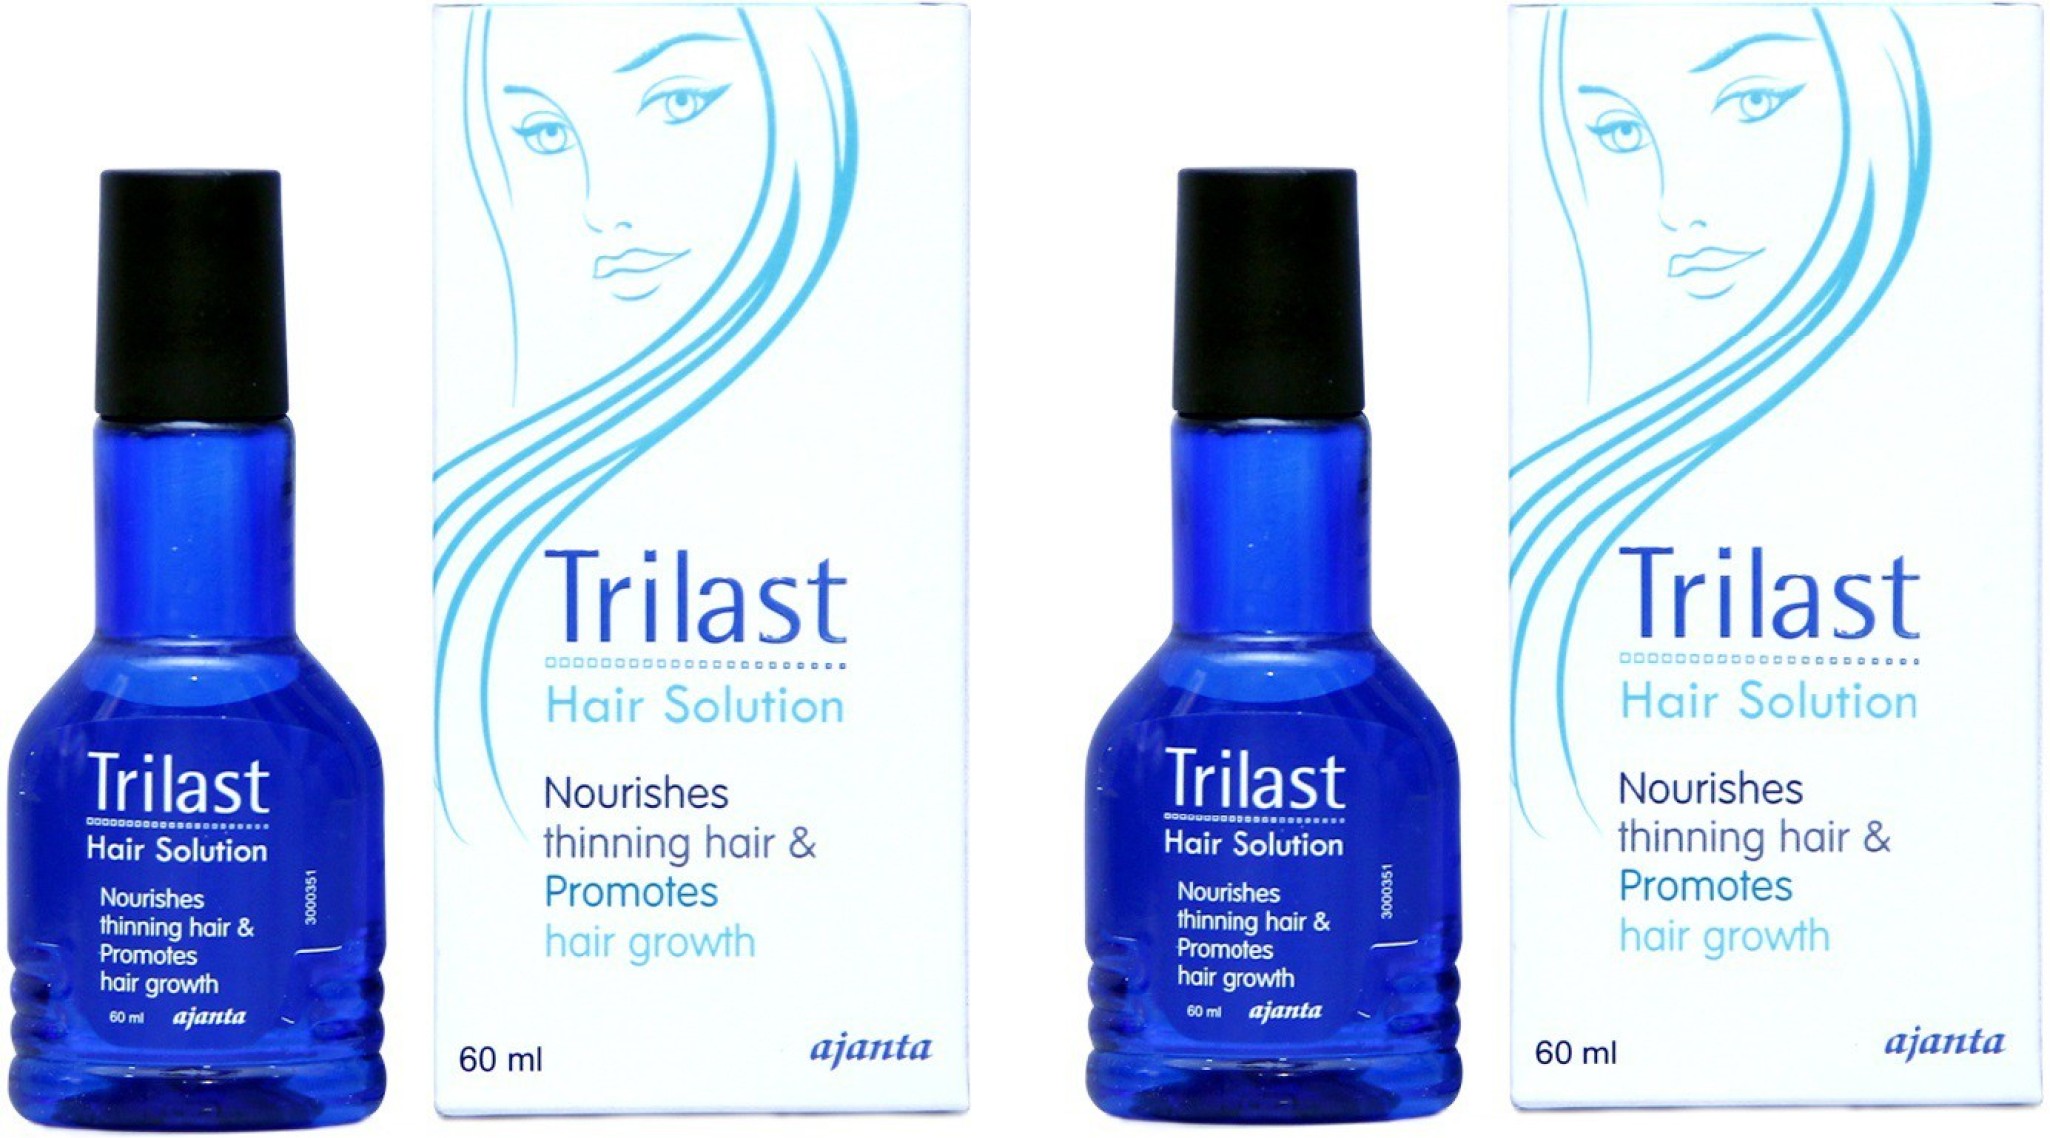 Trilast Hair Solution Pack of 2 - Price in India, Buy Trilast Hair Solution  Pack of 2 Online In India, Reviews, Ratings & Features 